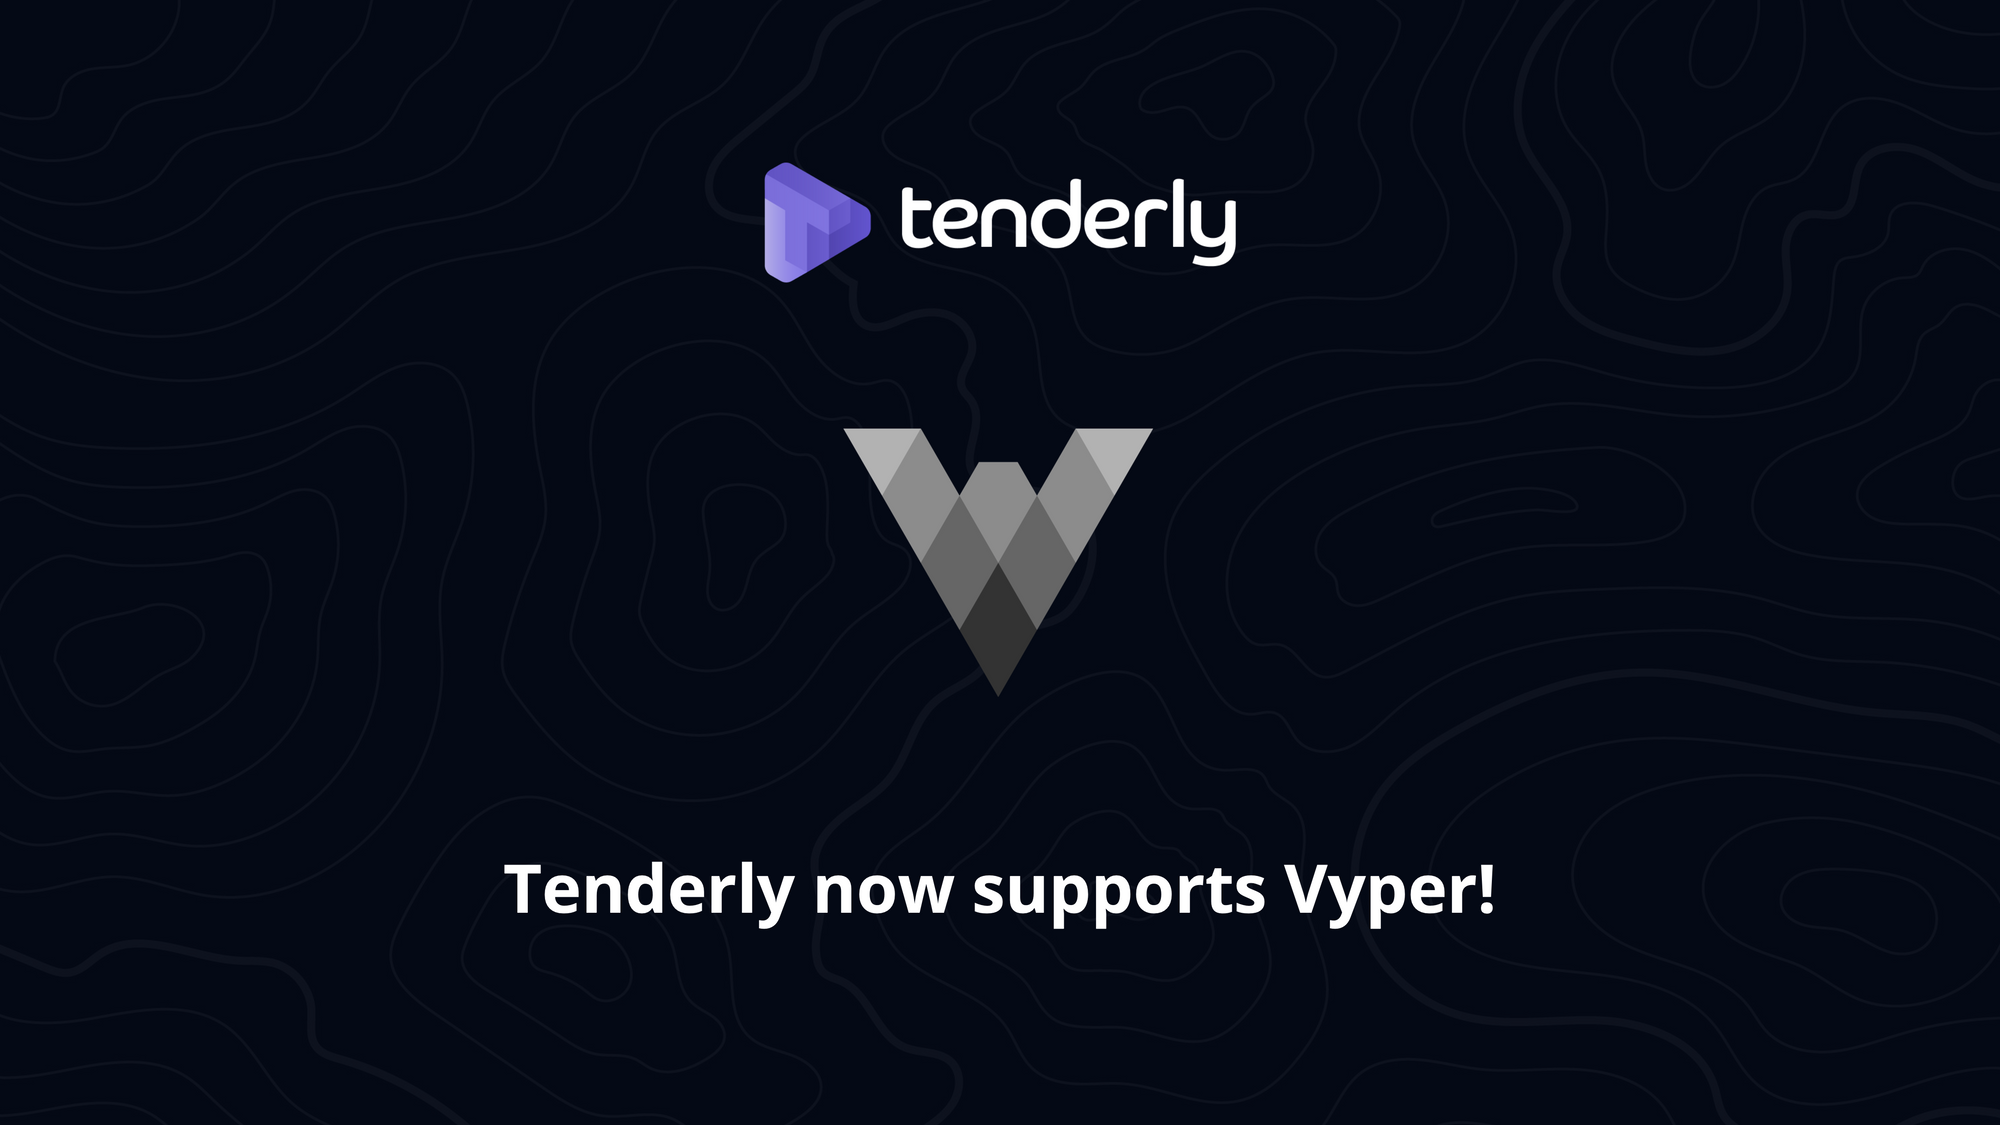 Tenderly now supports both Solidity and Vyper!